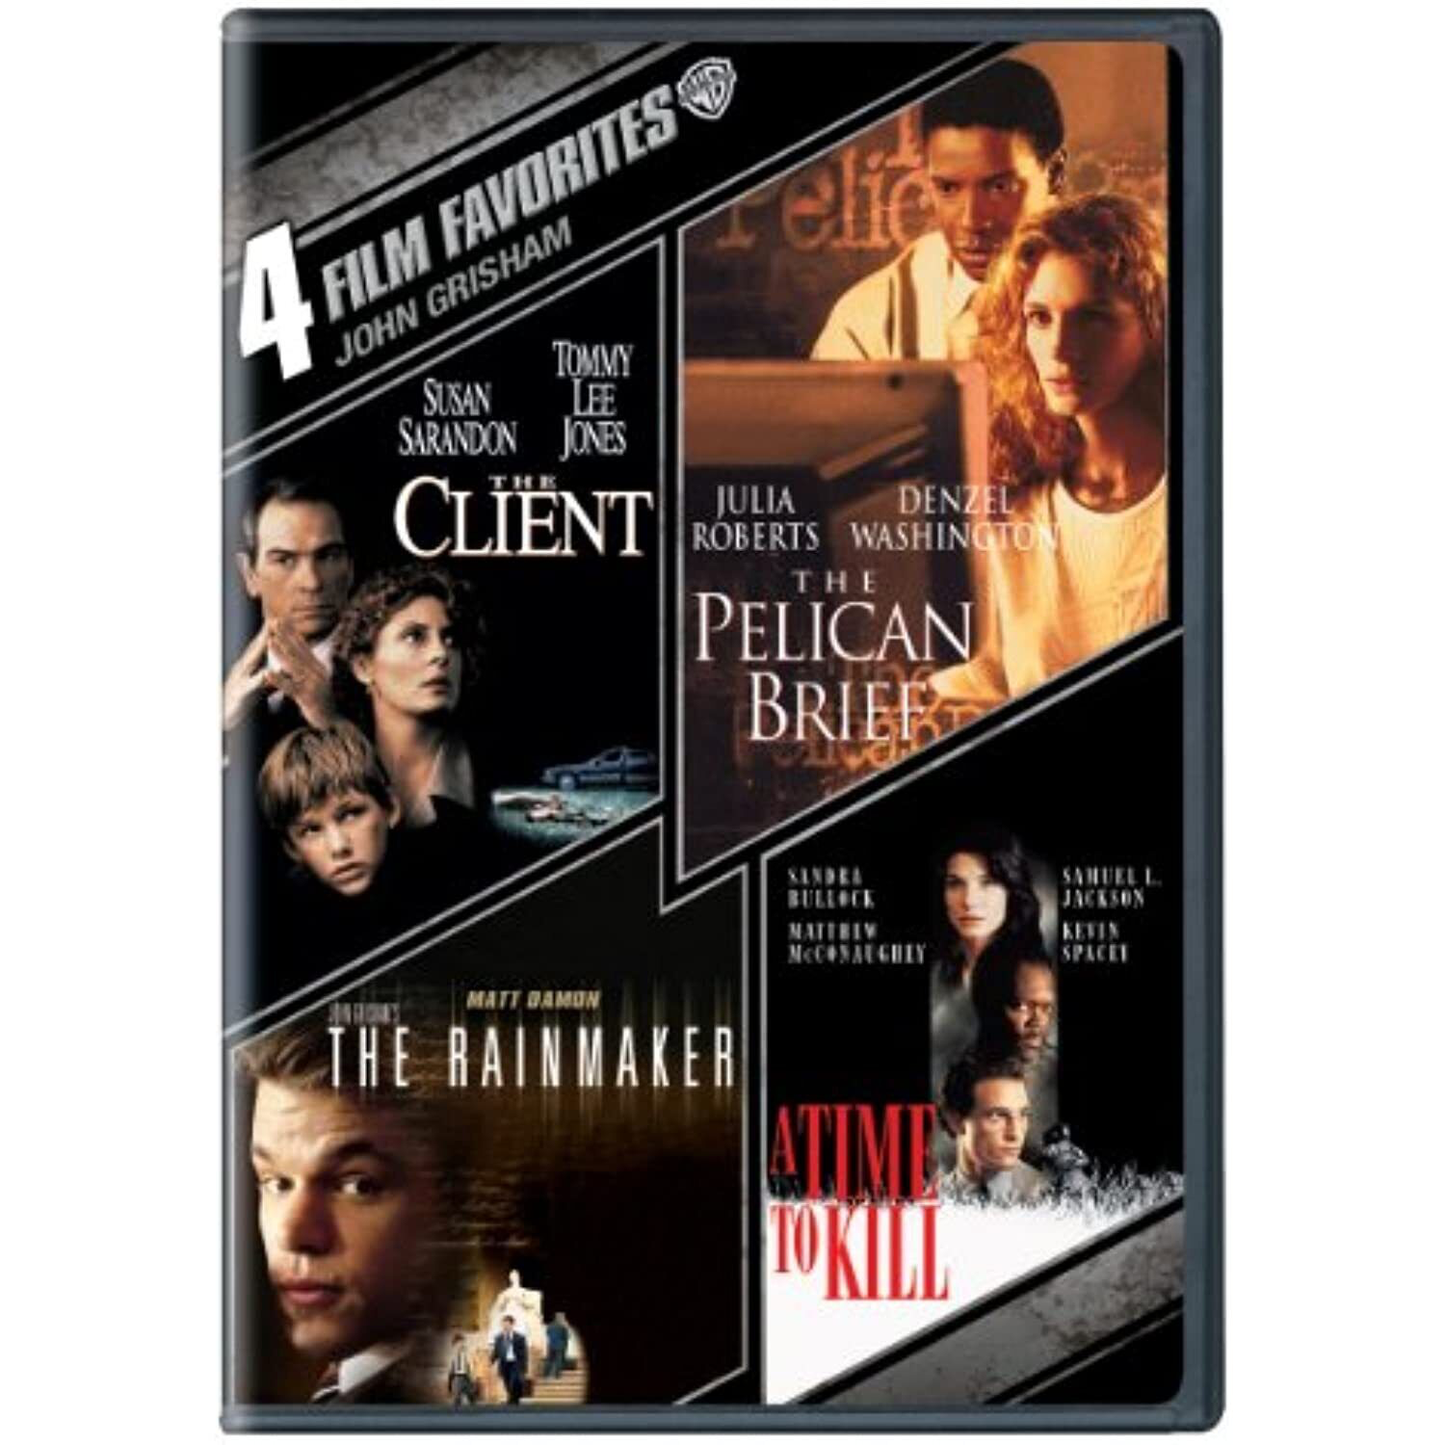 4 Film Favorites: John Grisham: The Client / The Pelican Brief / The Rainmaker / A Time To Kill (1996) - DVD